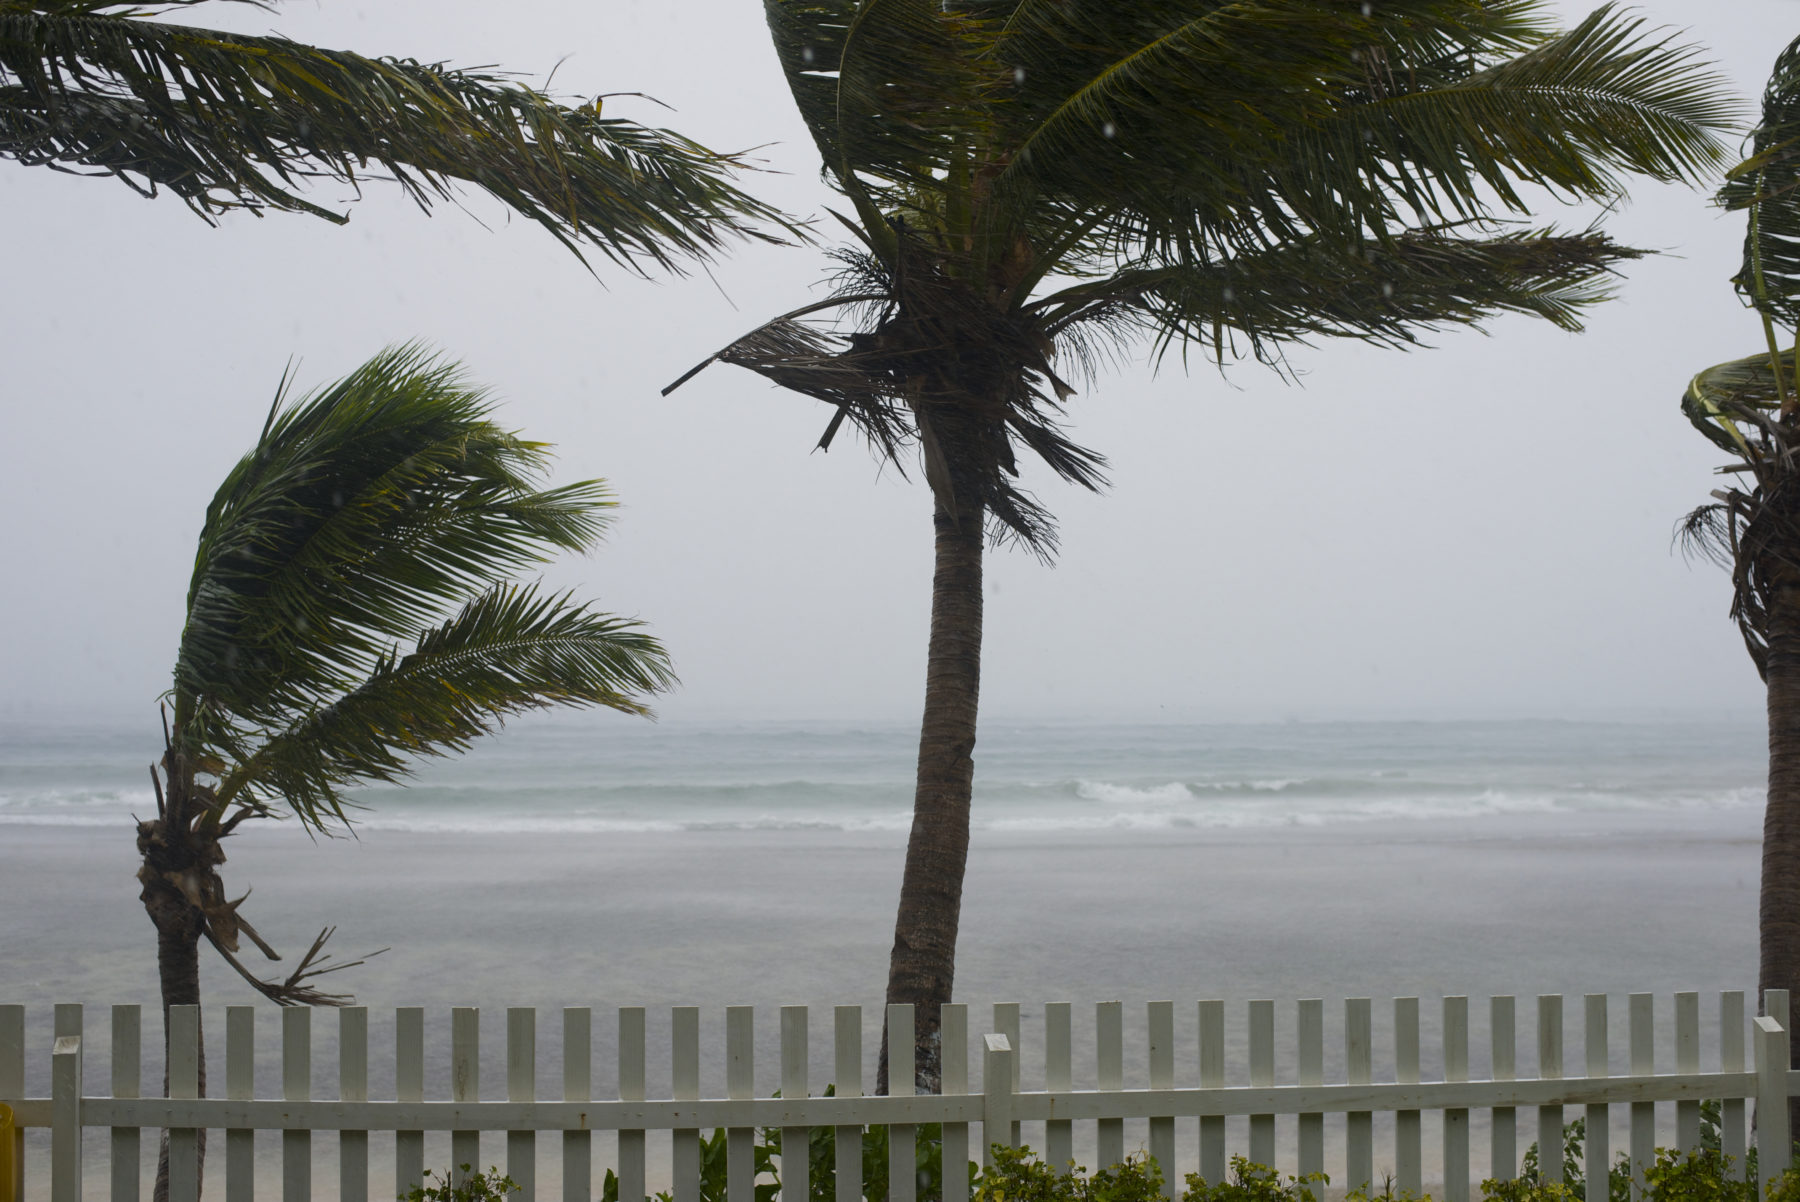 Hurricane Sally blowing strong winds through palm trees